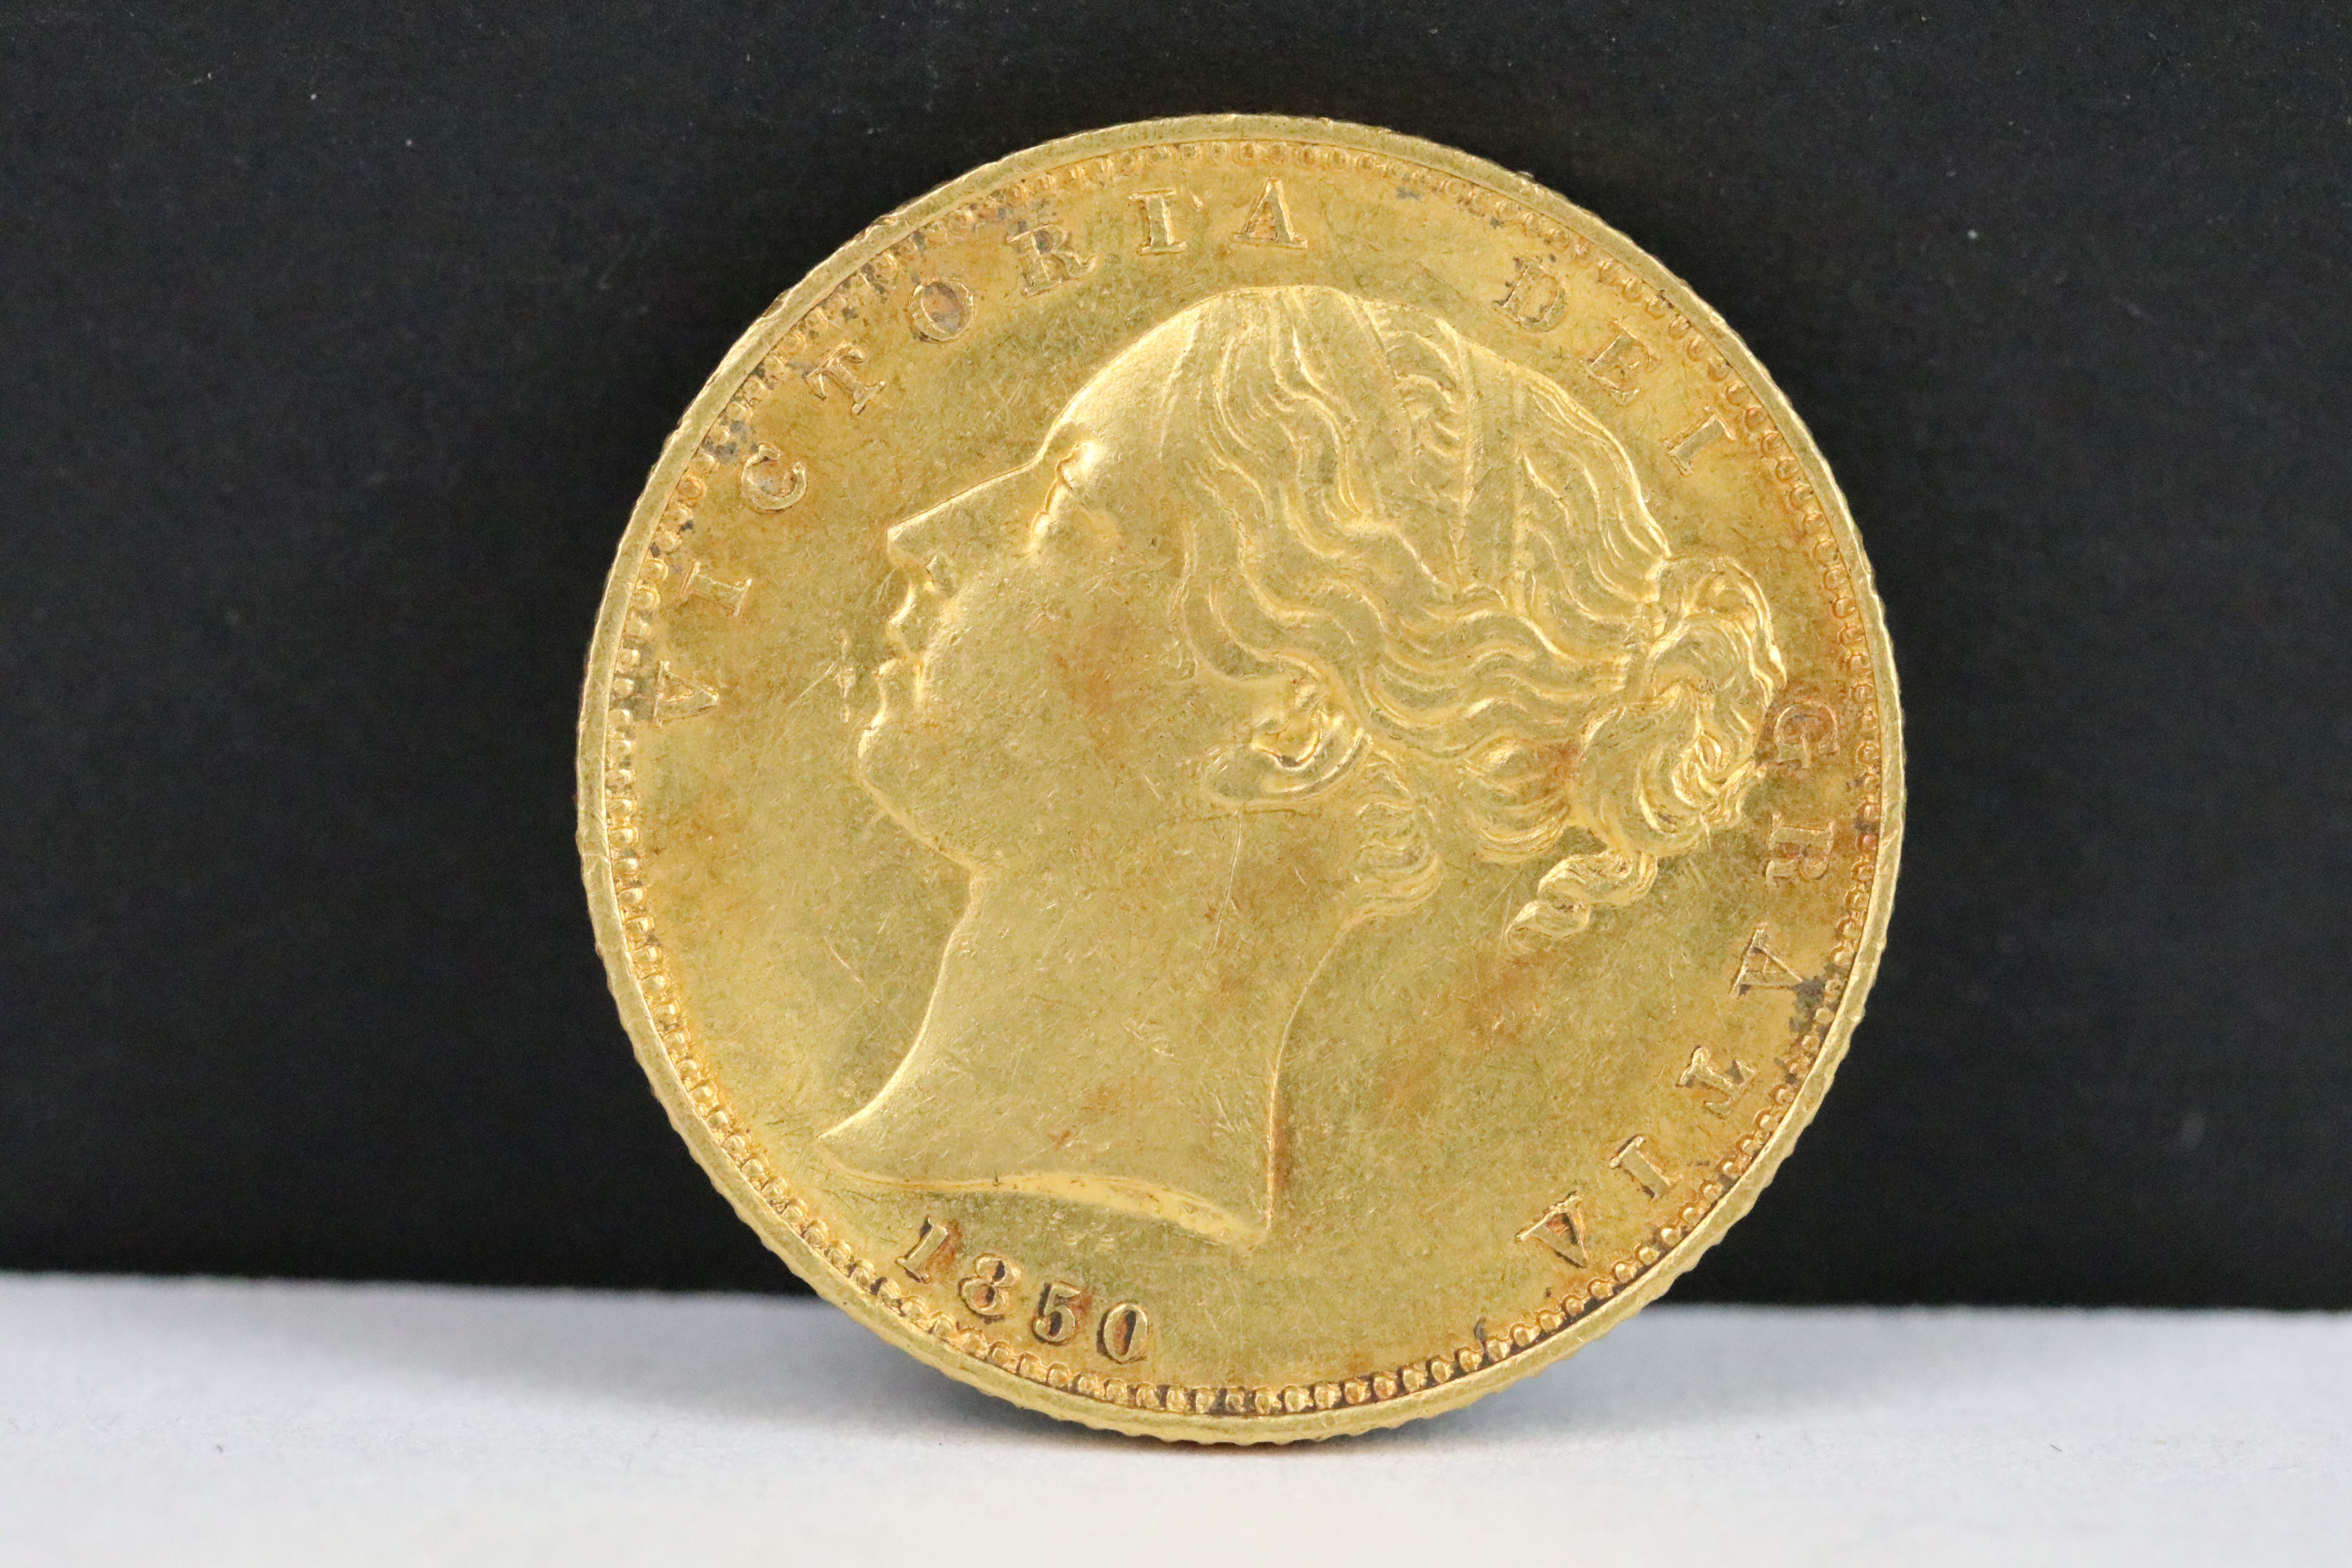 A British Queen Victoria 1850 gold full sovereign coin. - Image 2 of 3